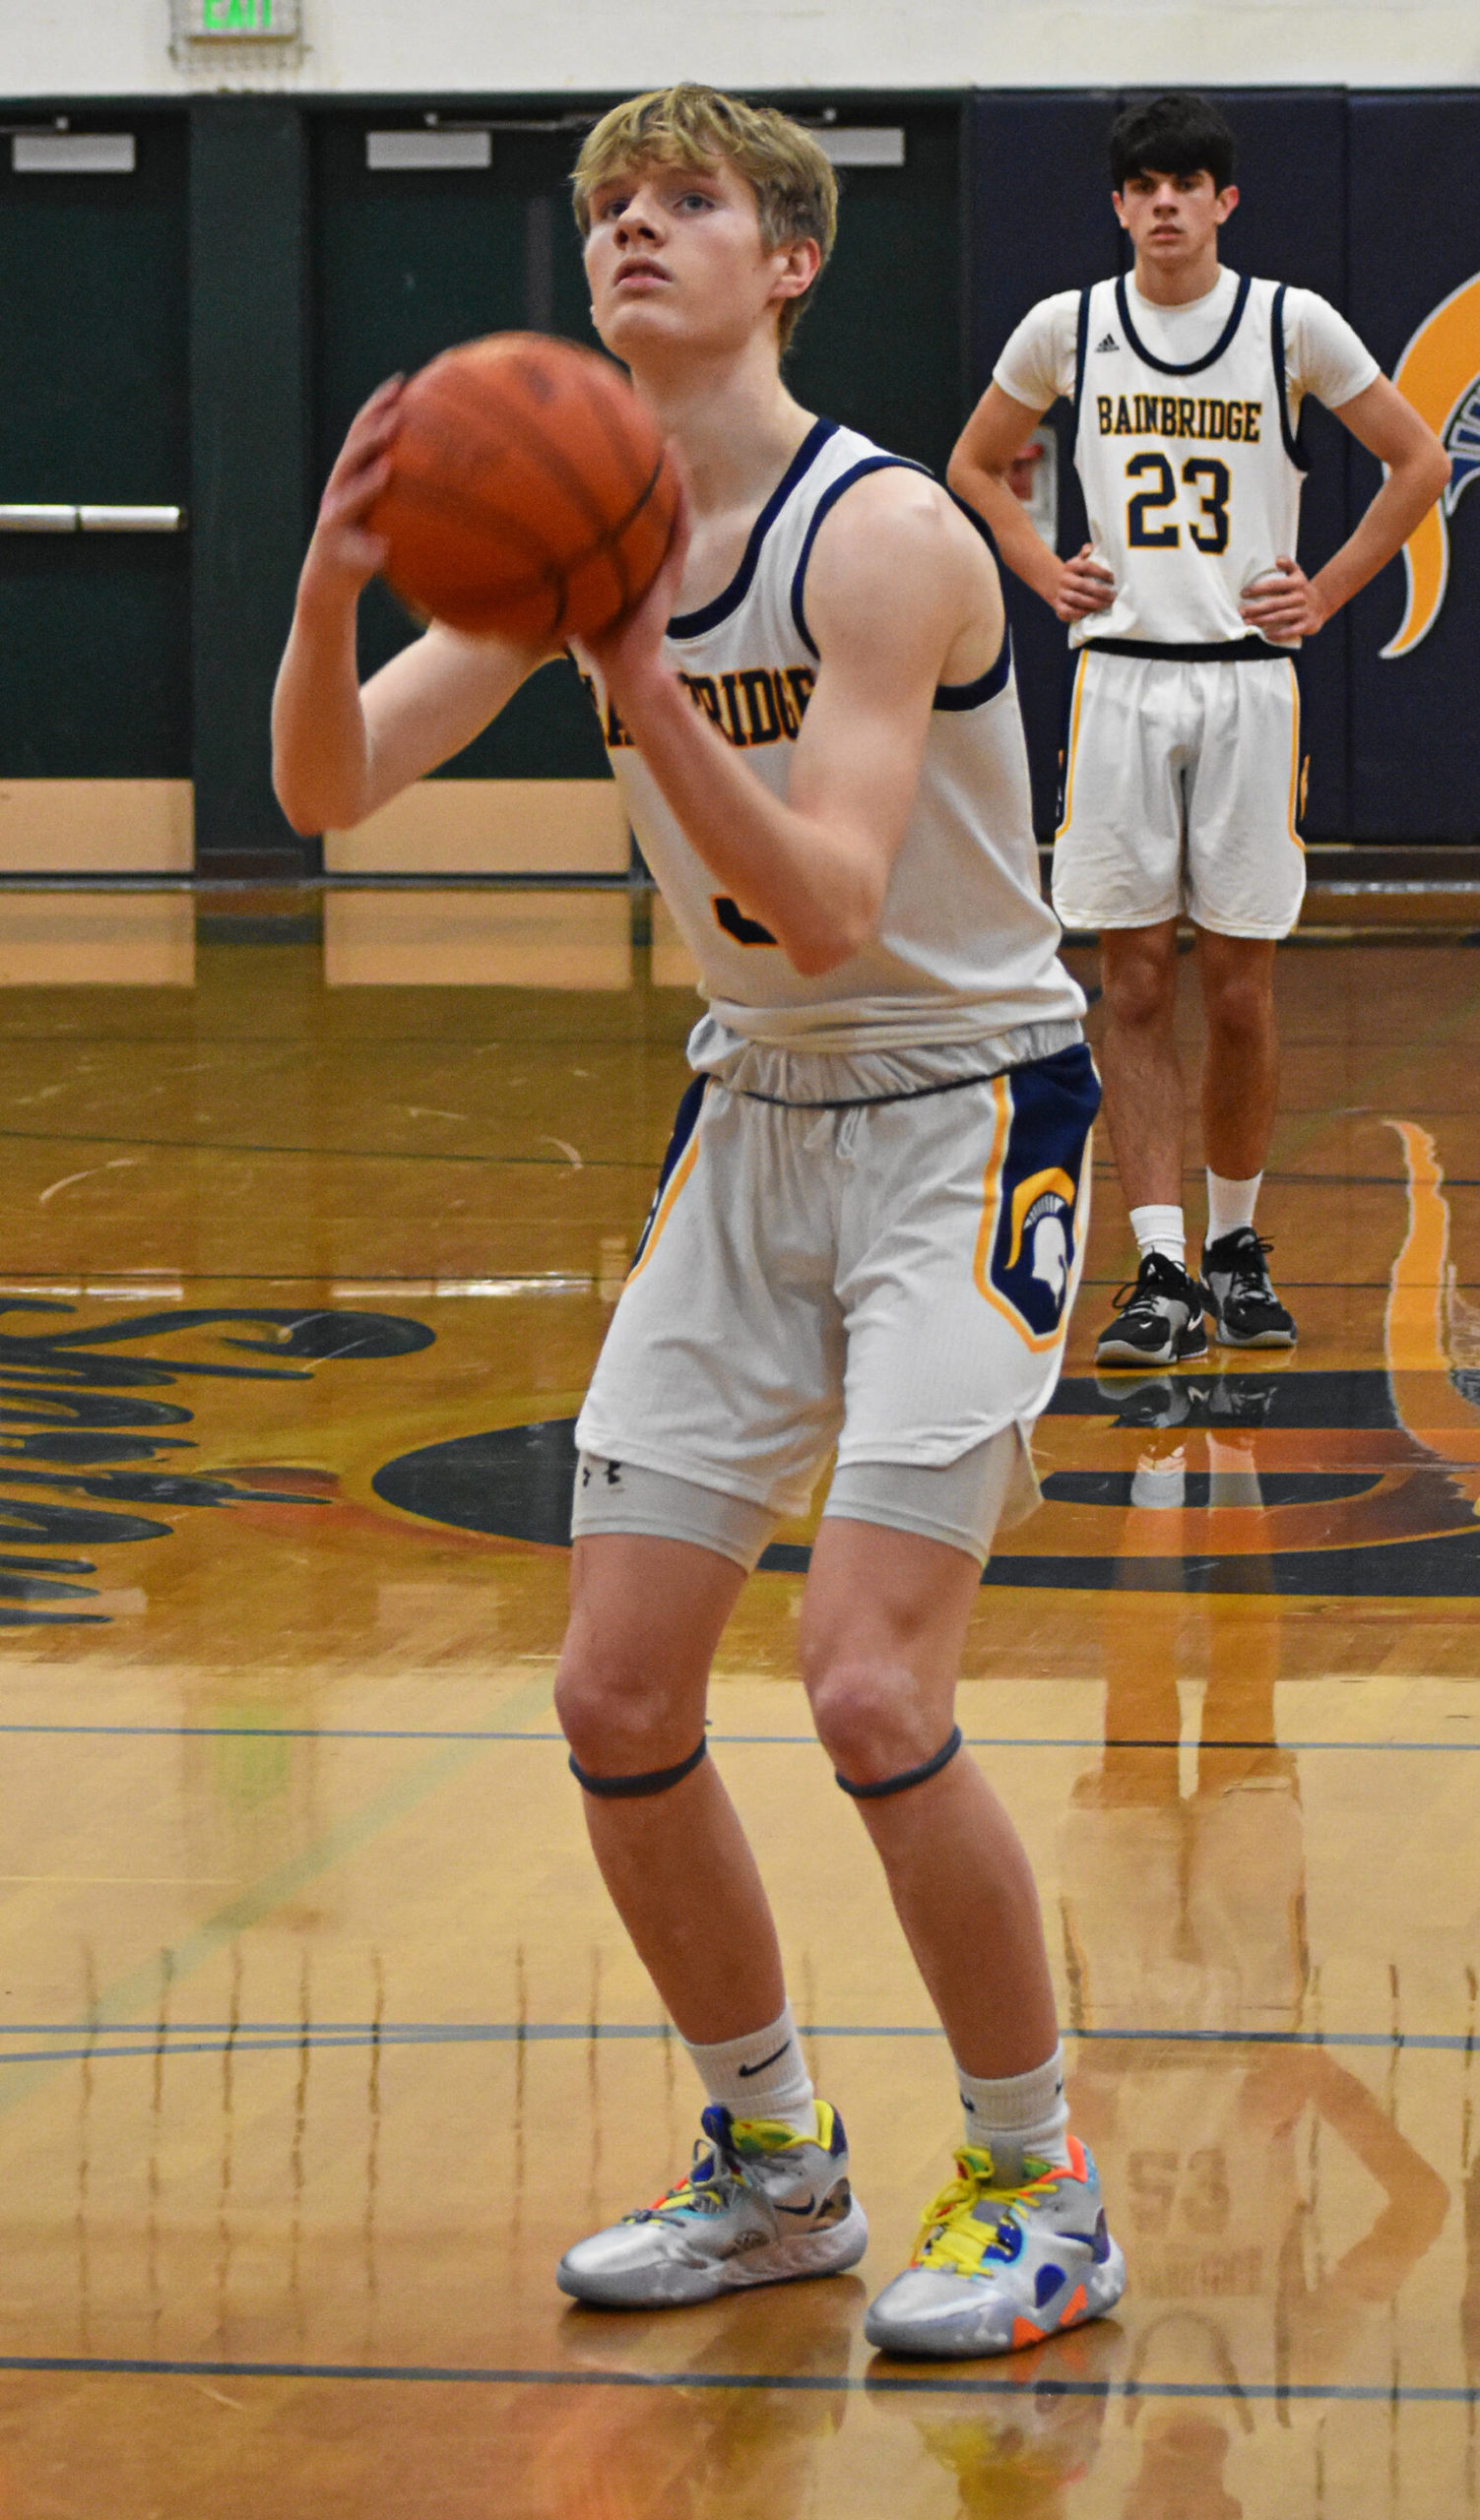 Sam Nylund led the Spartans with 18 points.